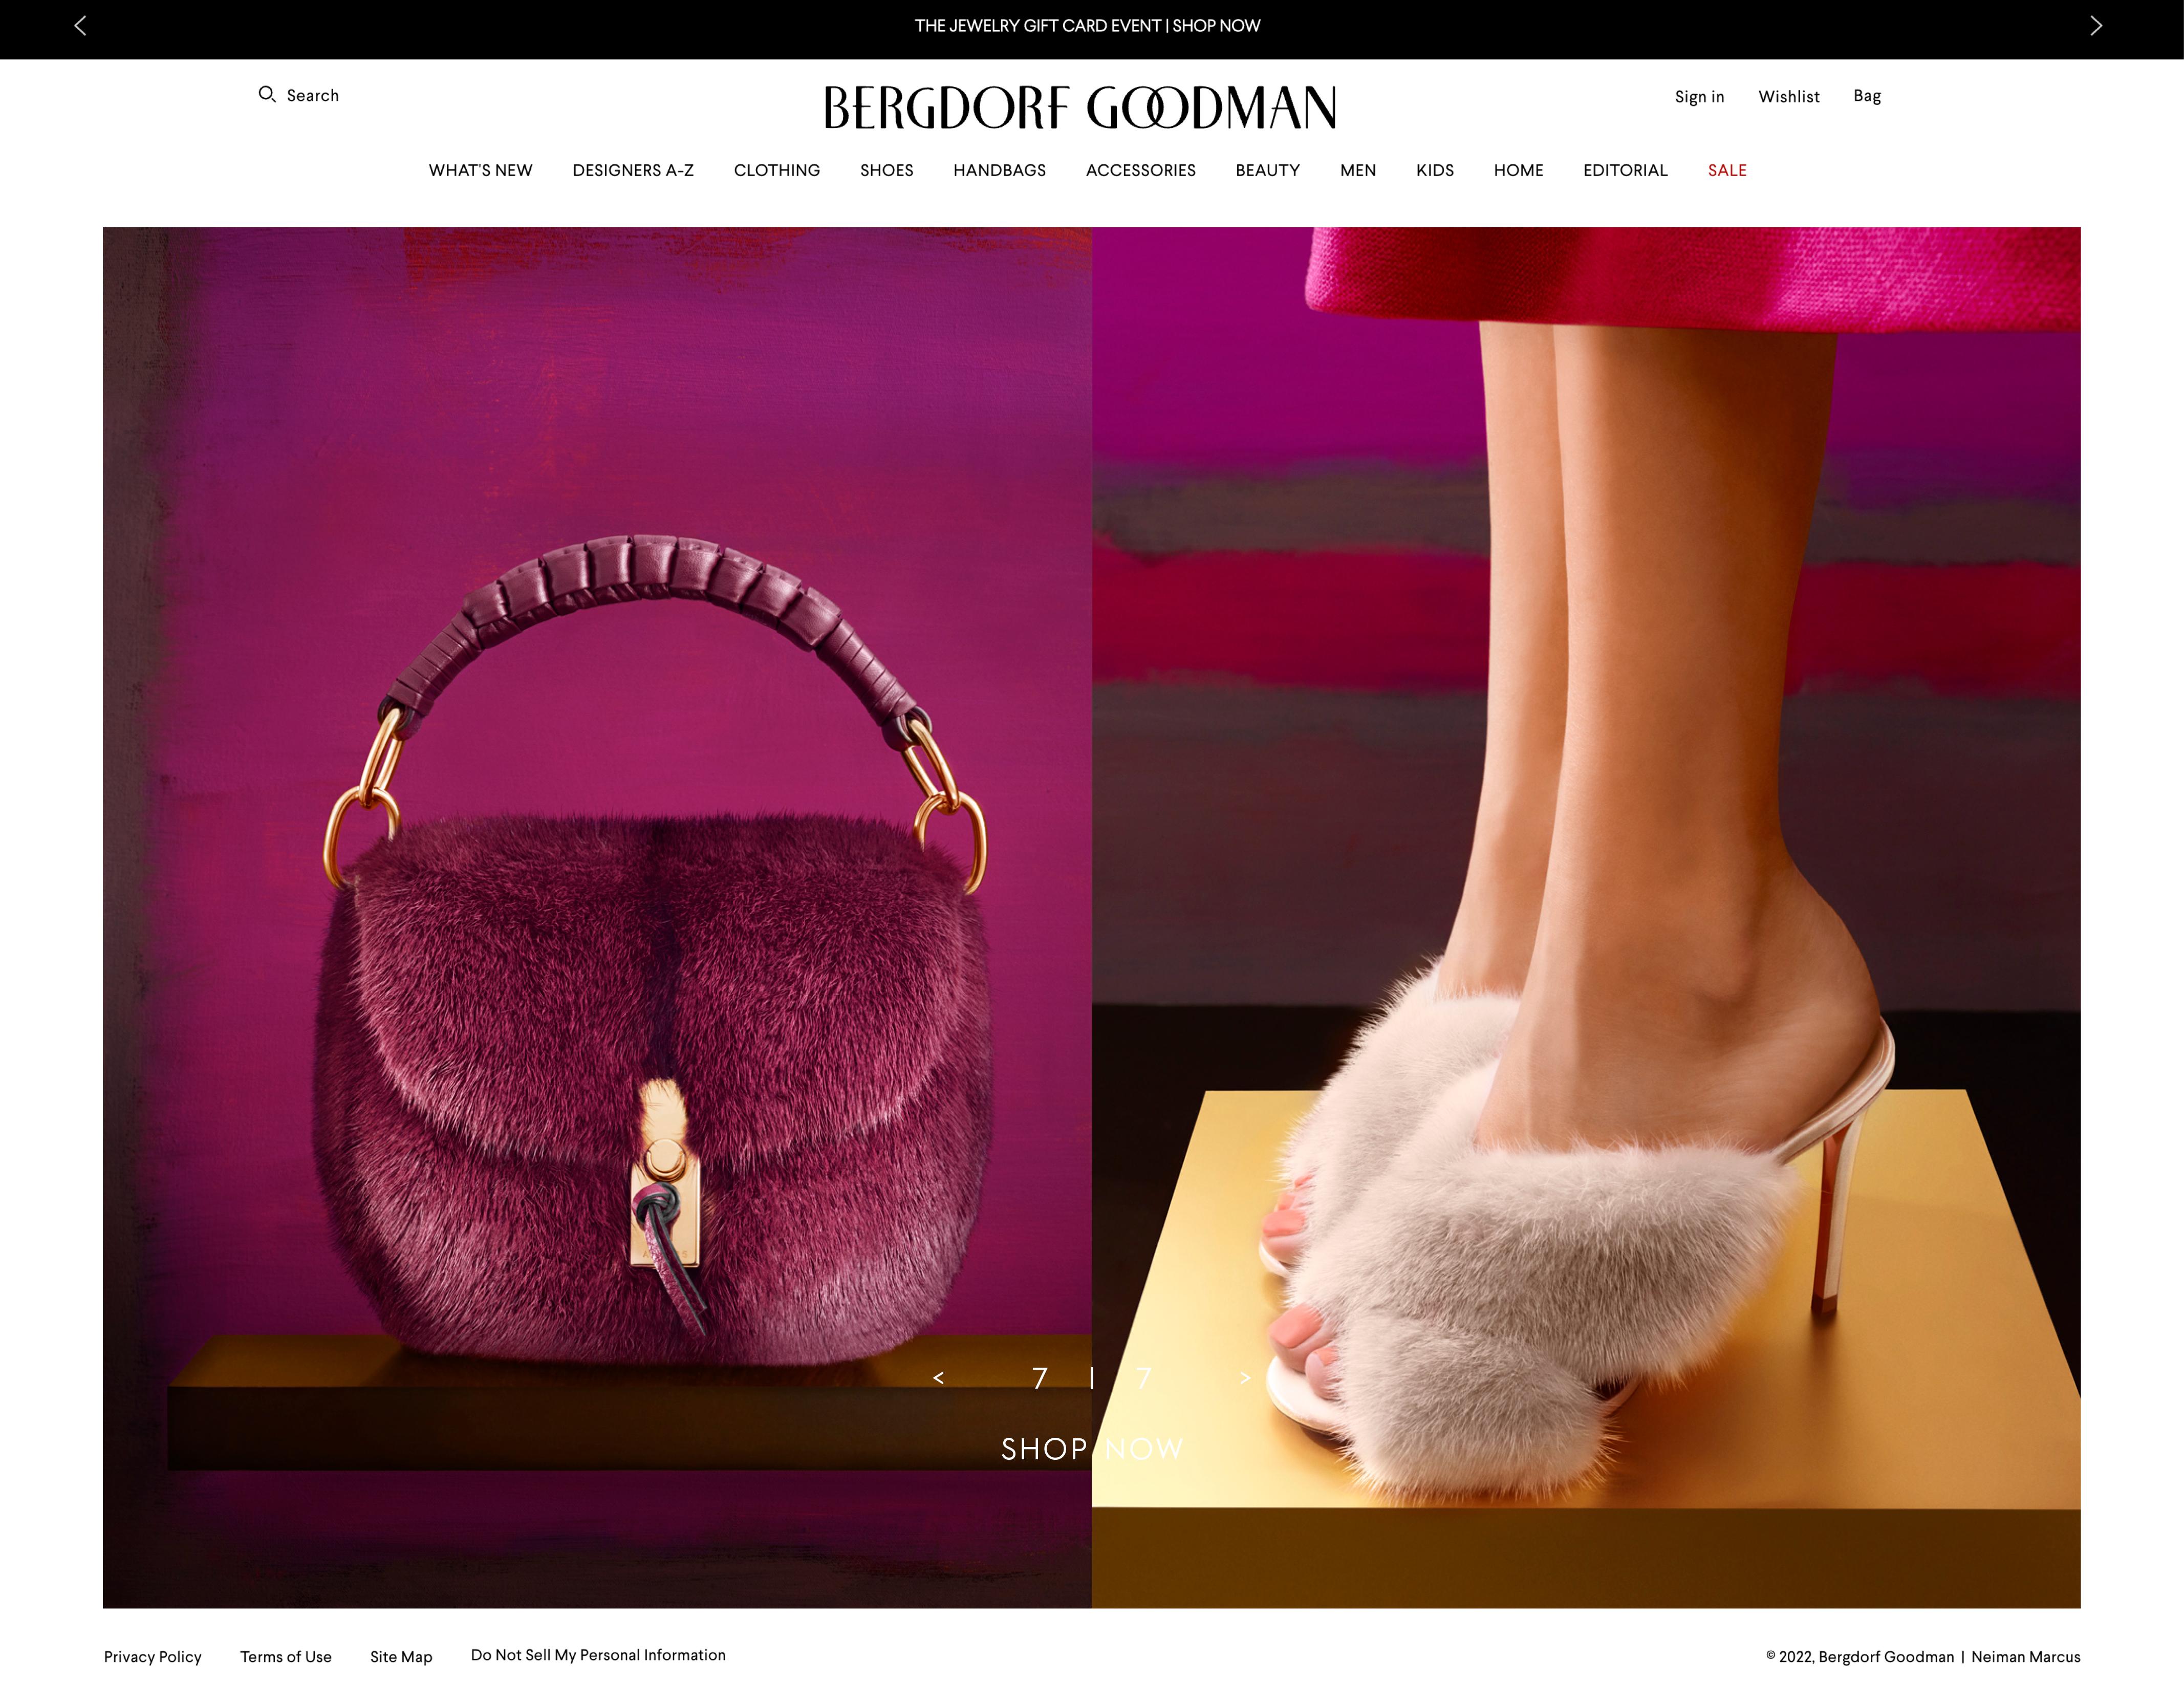 What's next for Neiman Marcus and Bergdorf Goodman - Glossy